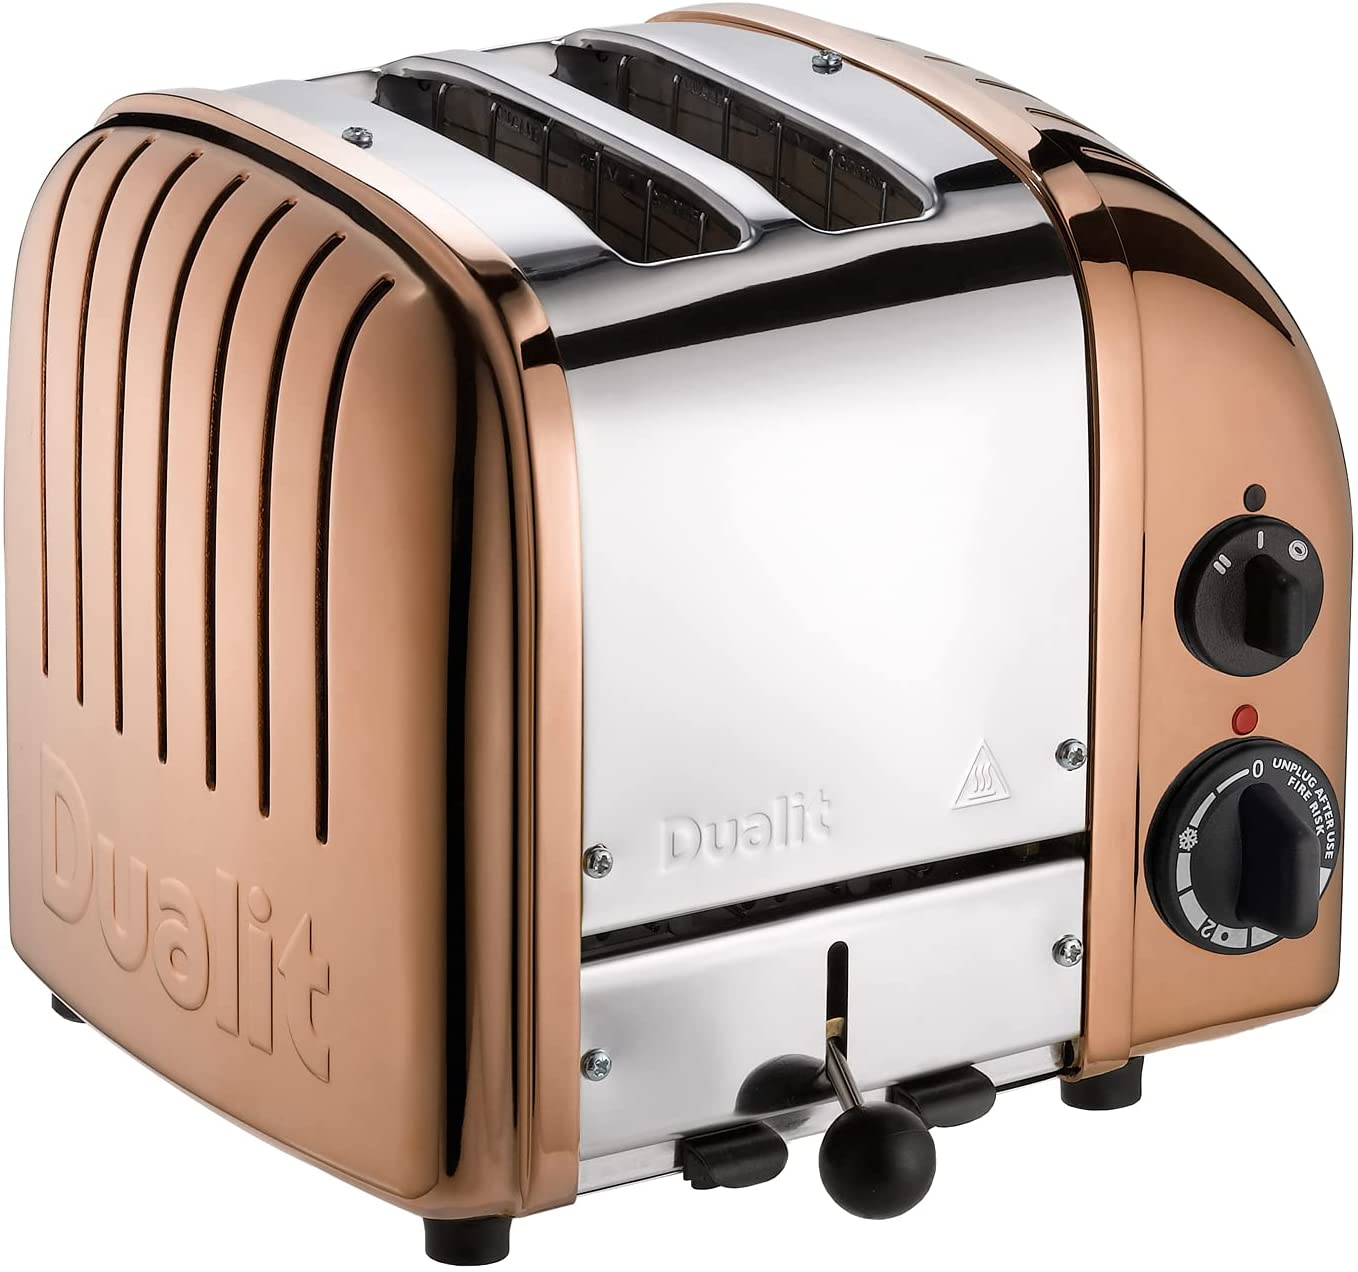 dualit-toaster-copper